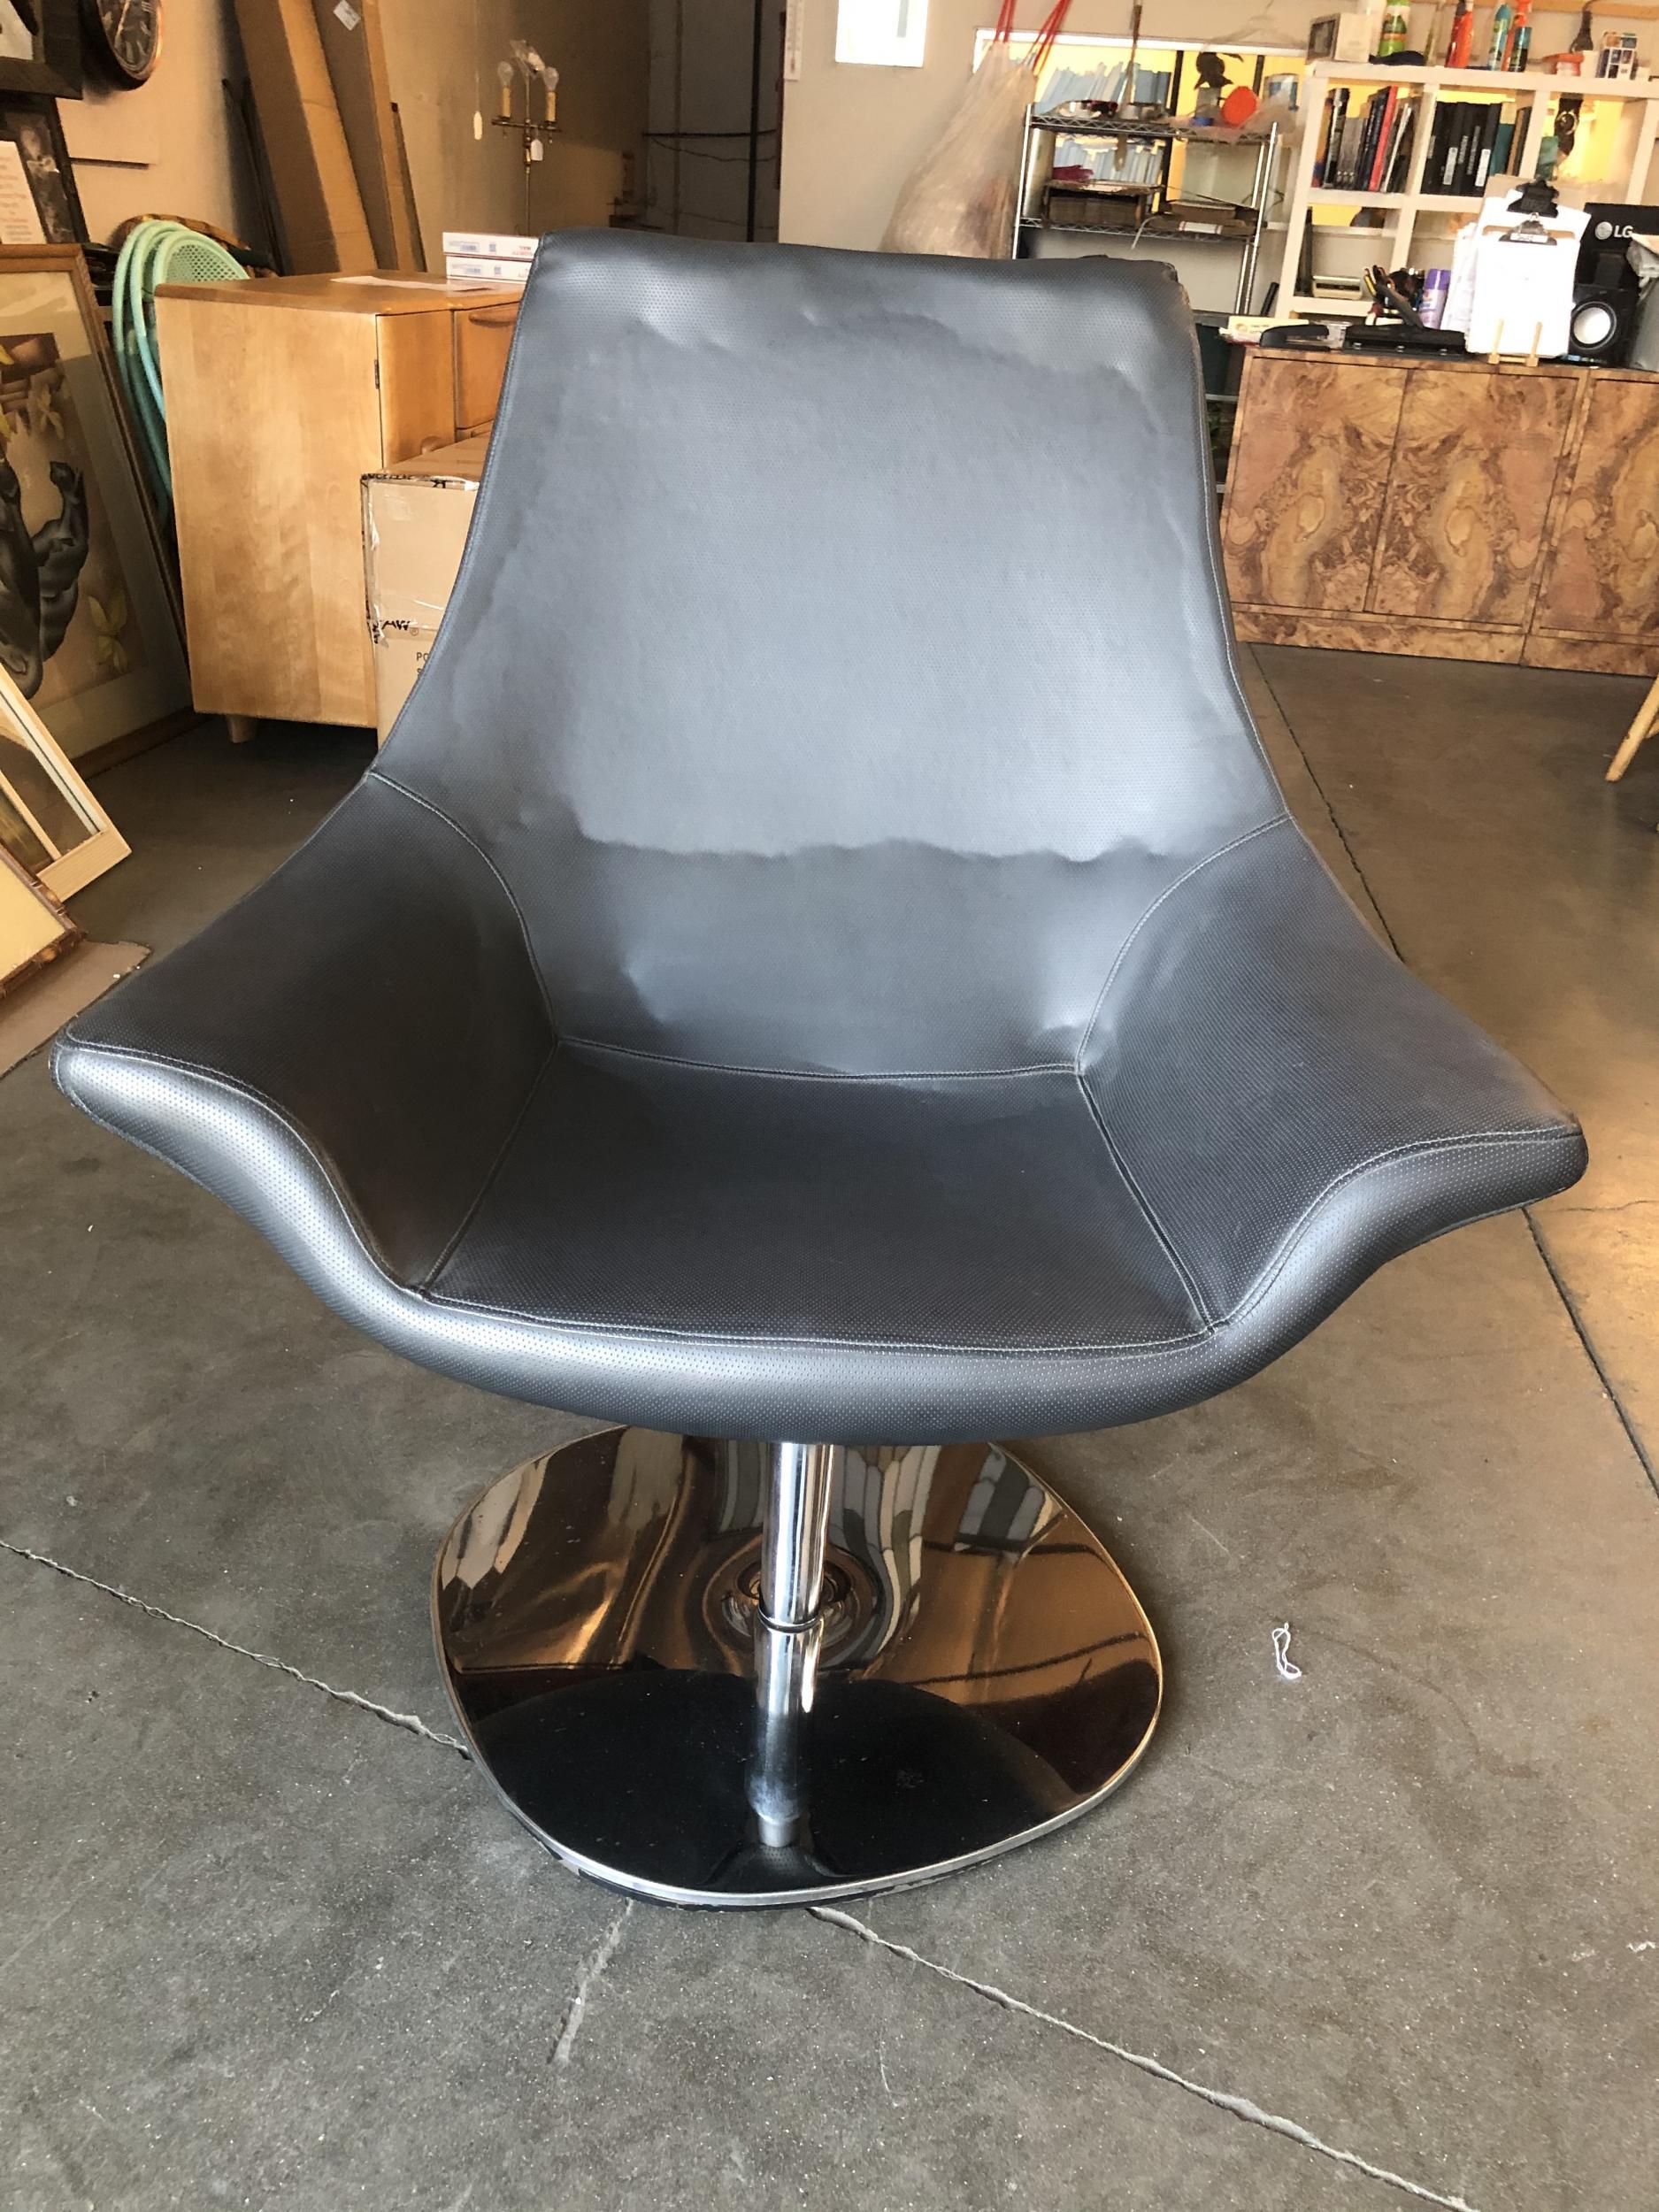 High style 1980s modern captain's lounge chair featuring a large over oversized cobra shaped back upholstered in perforated high-quality Naugahyde with chrome base. Perfect for the Memphis lounge room looking for something to balance out the room.